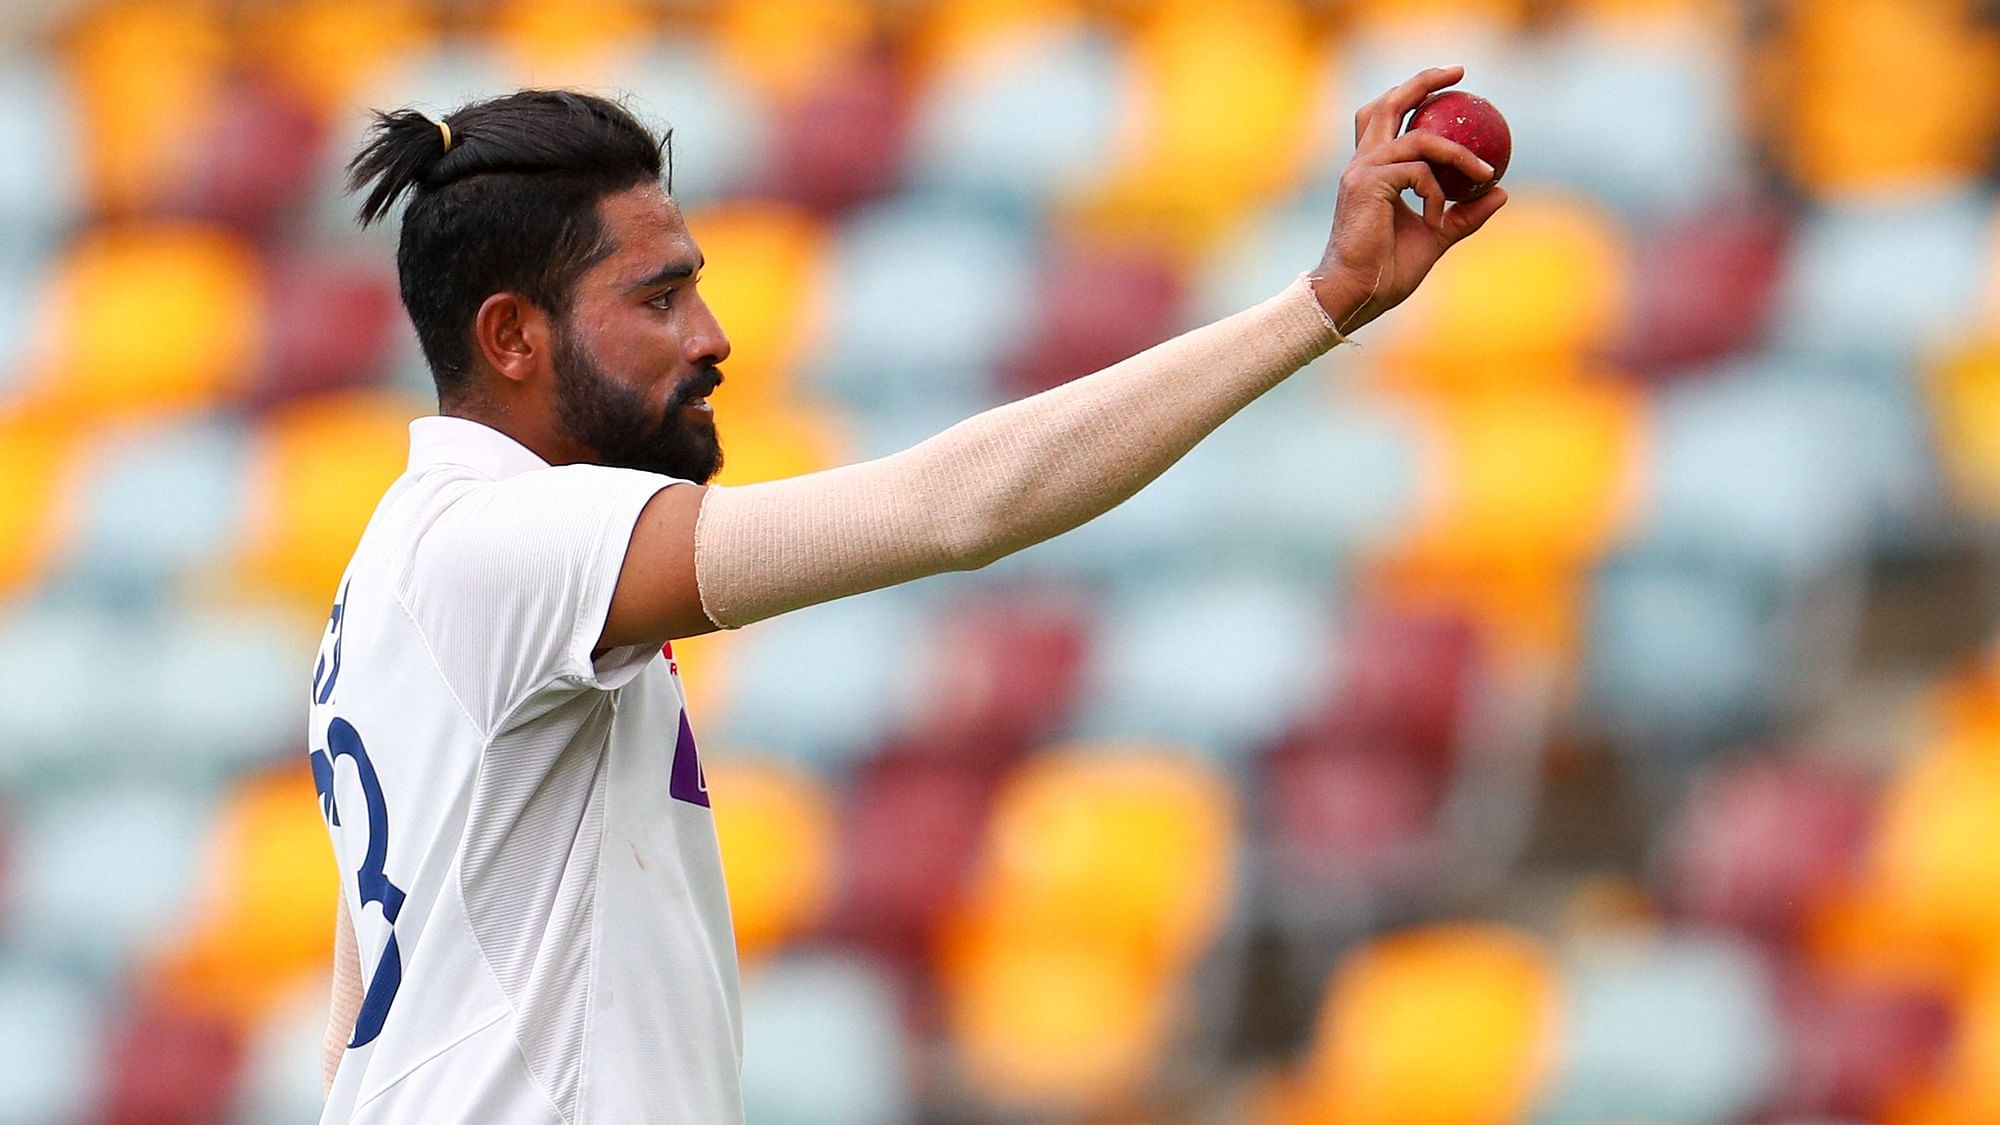 Mohammed Siraj celebrates his maiden five-wicket haul in Test cricket.&nbsp;